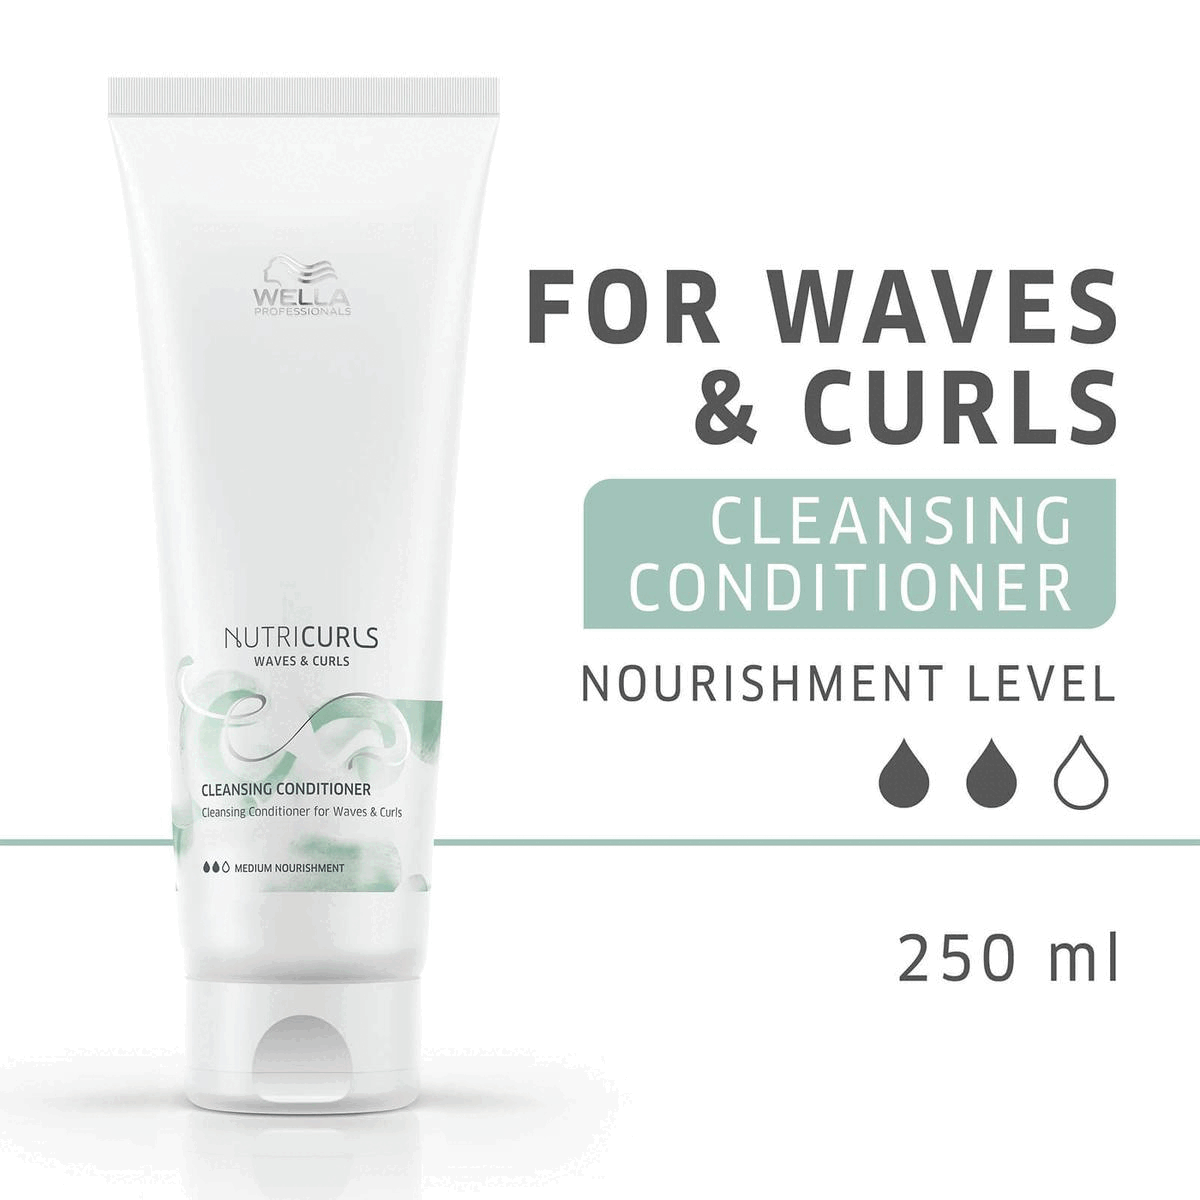 For waves and curls, Formulated without silicones, nourishment level, find the perfect partner
            